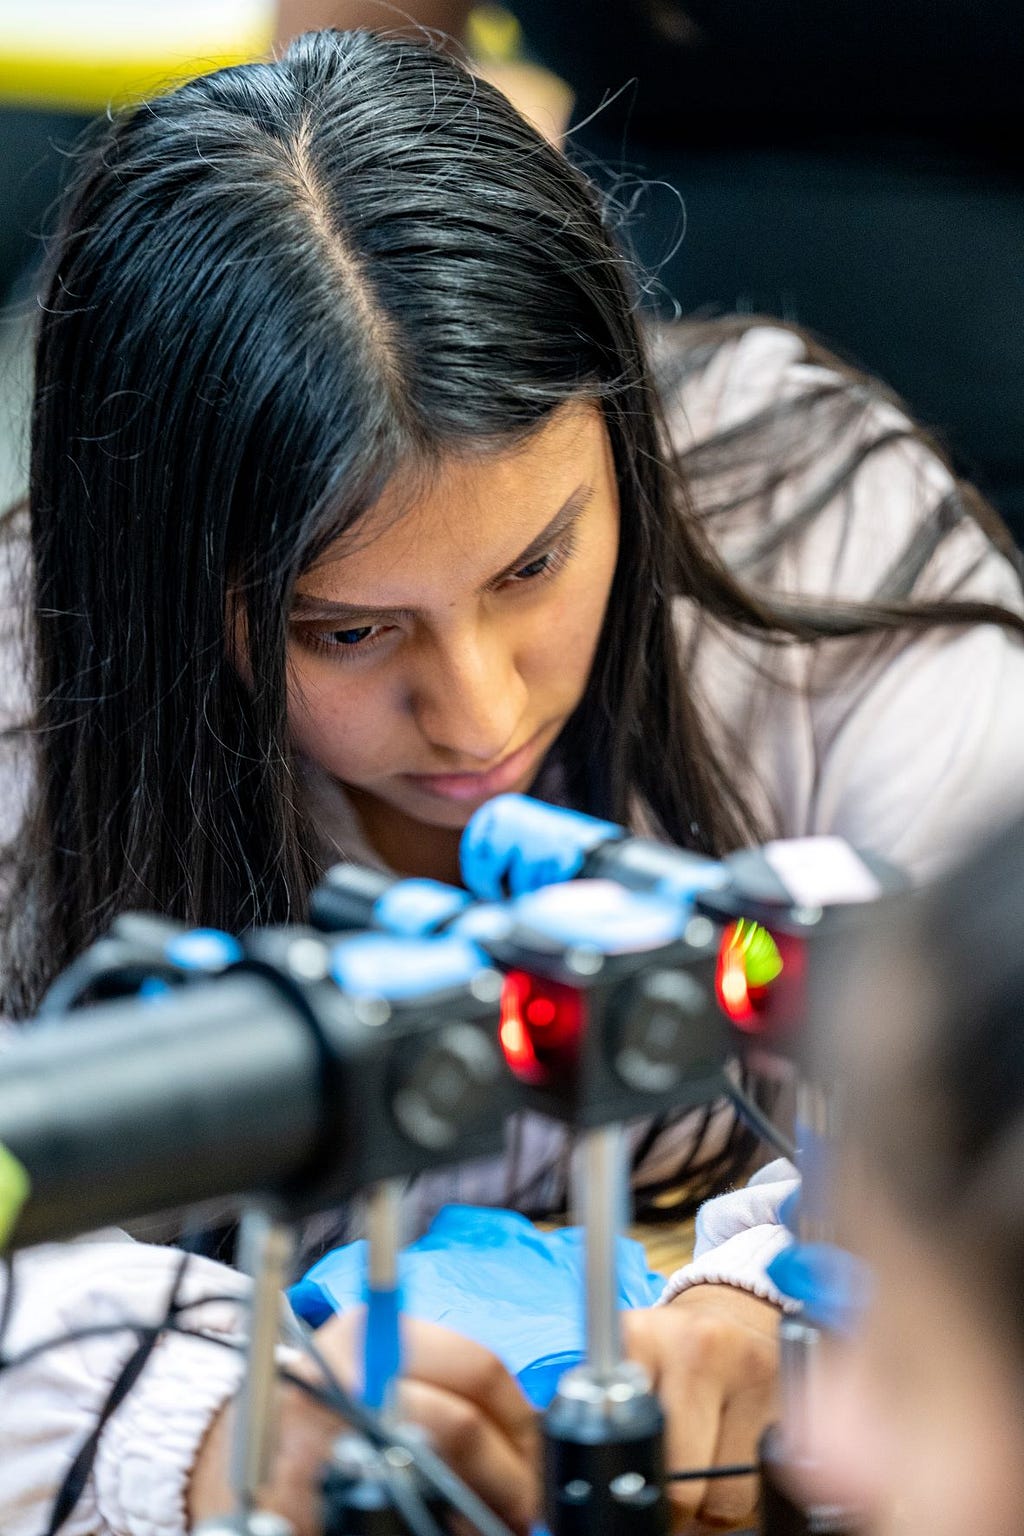 Mount Vernon High School student Gladys Gonzalez focuses as she puts together a piece of a microscope.